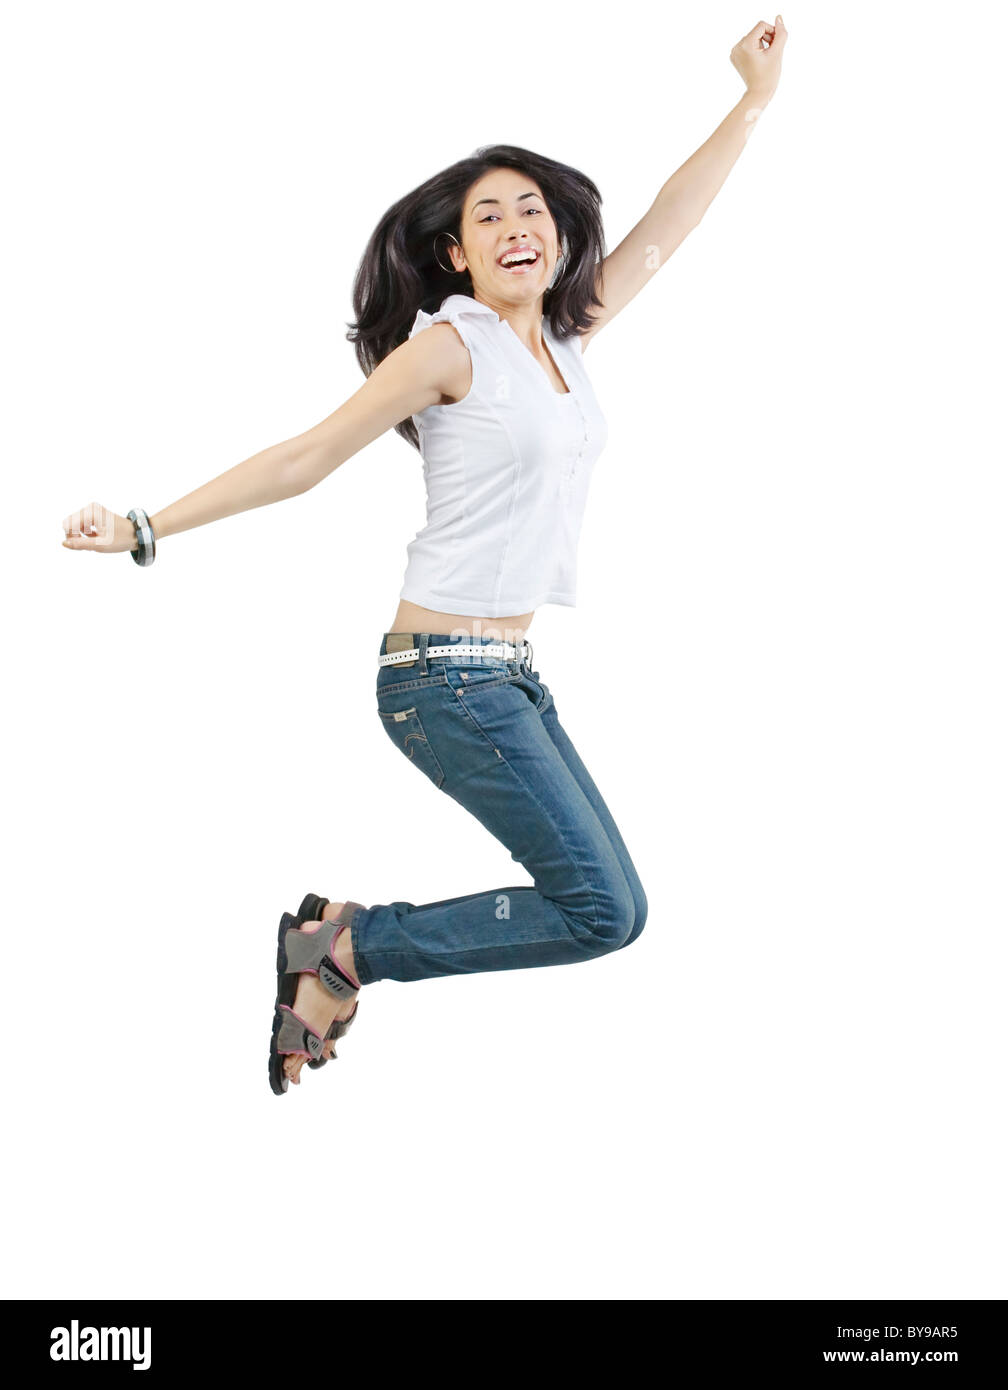 Girl jumping in the air Stock Photo